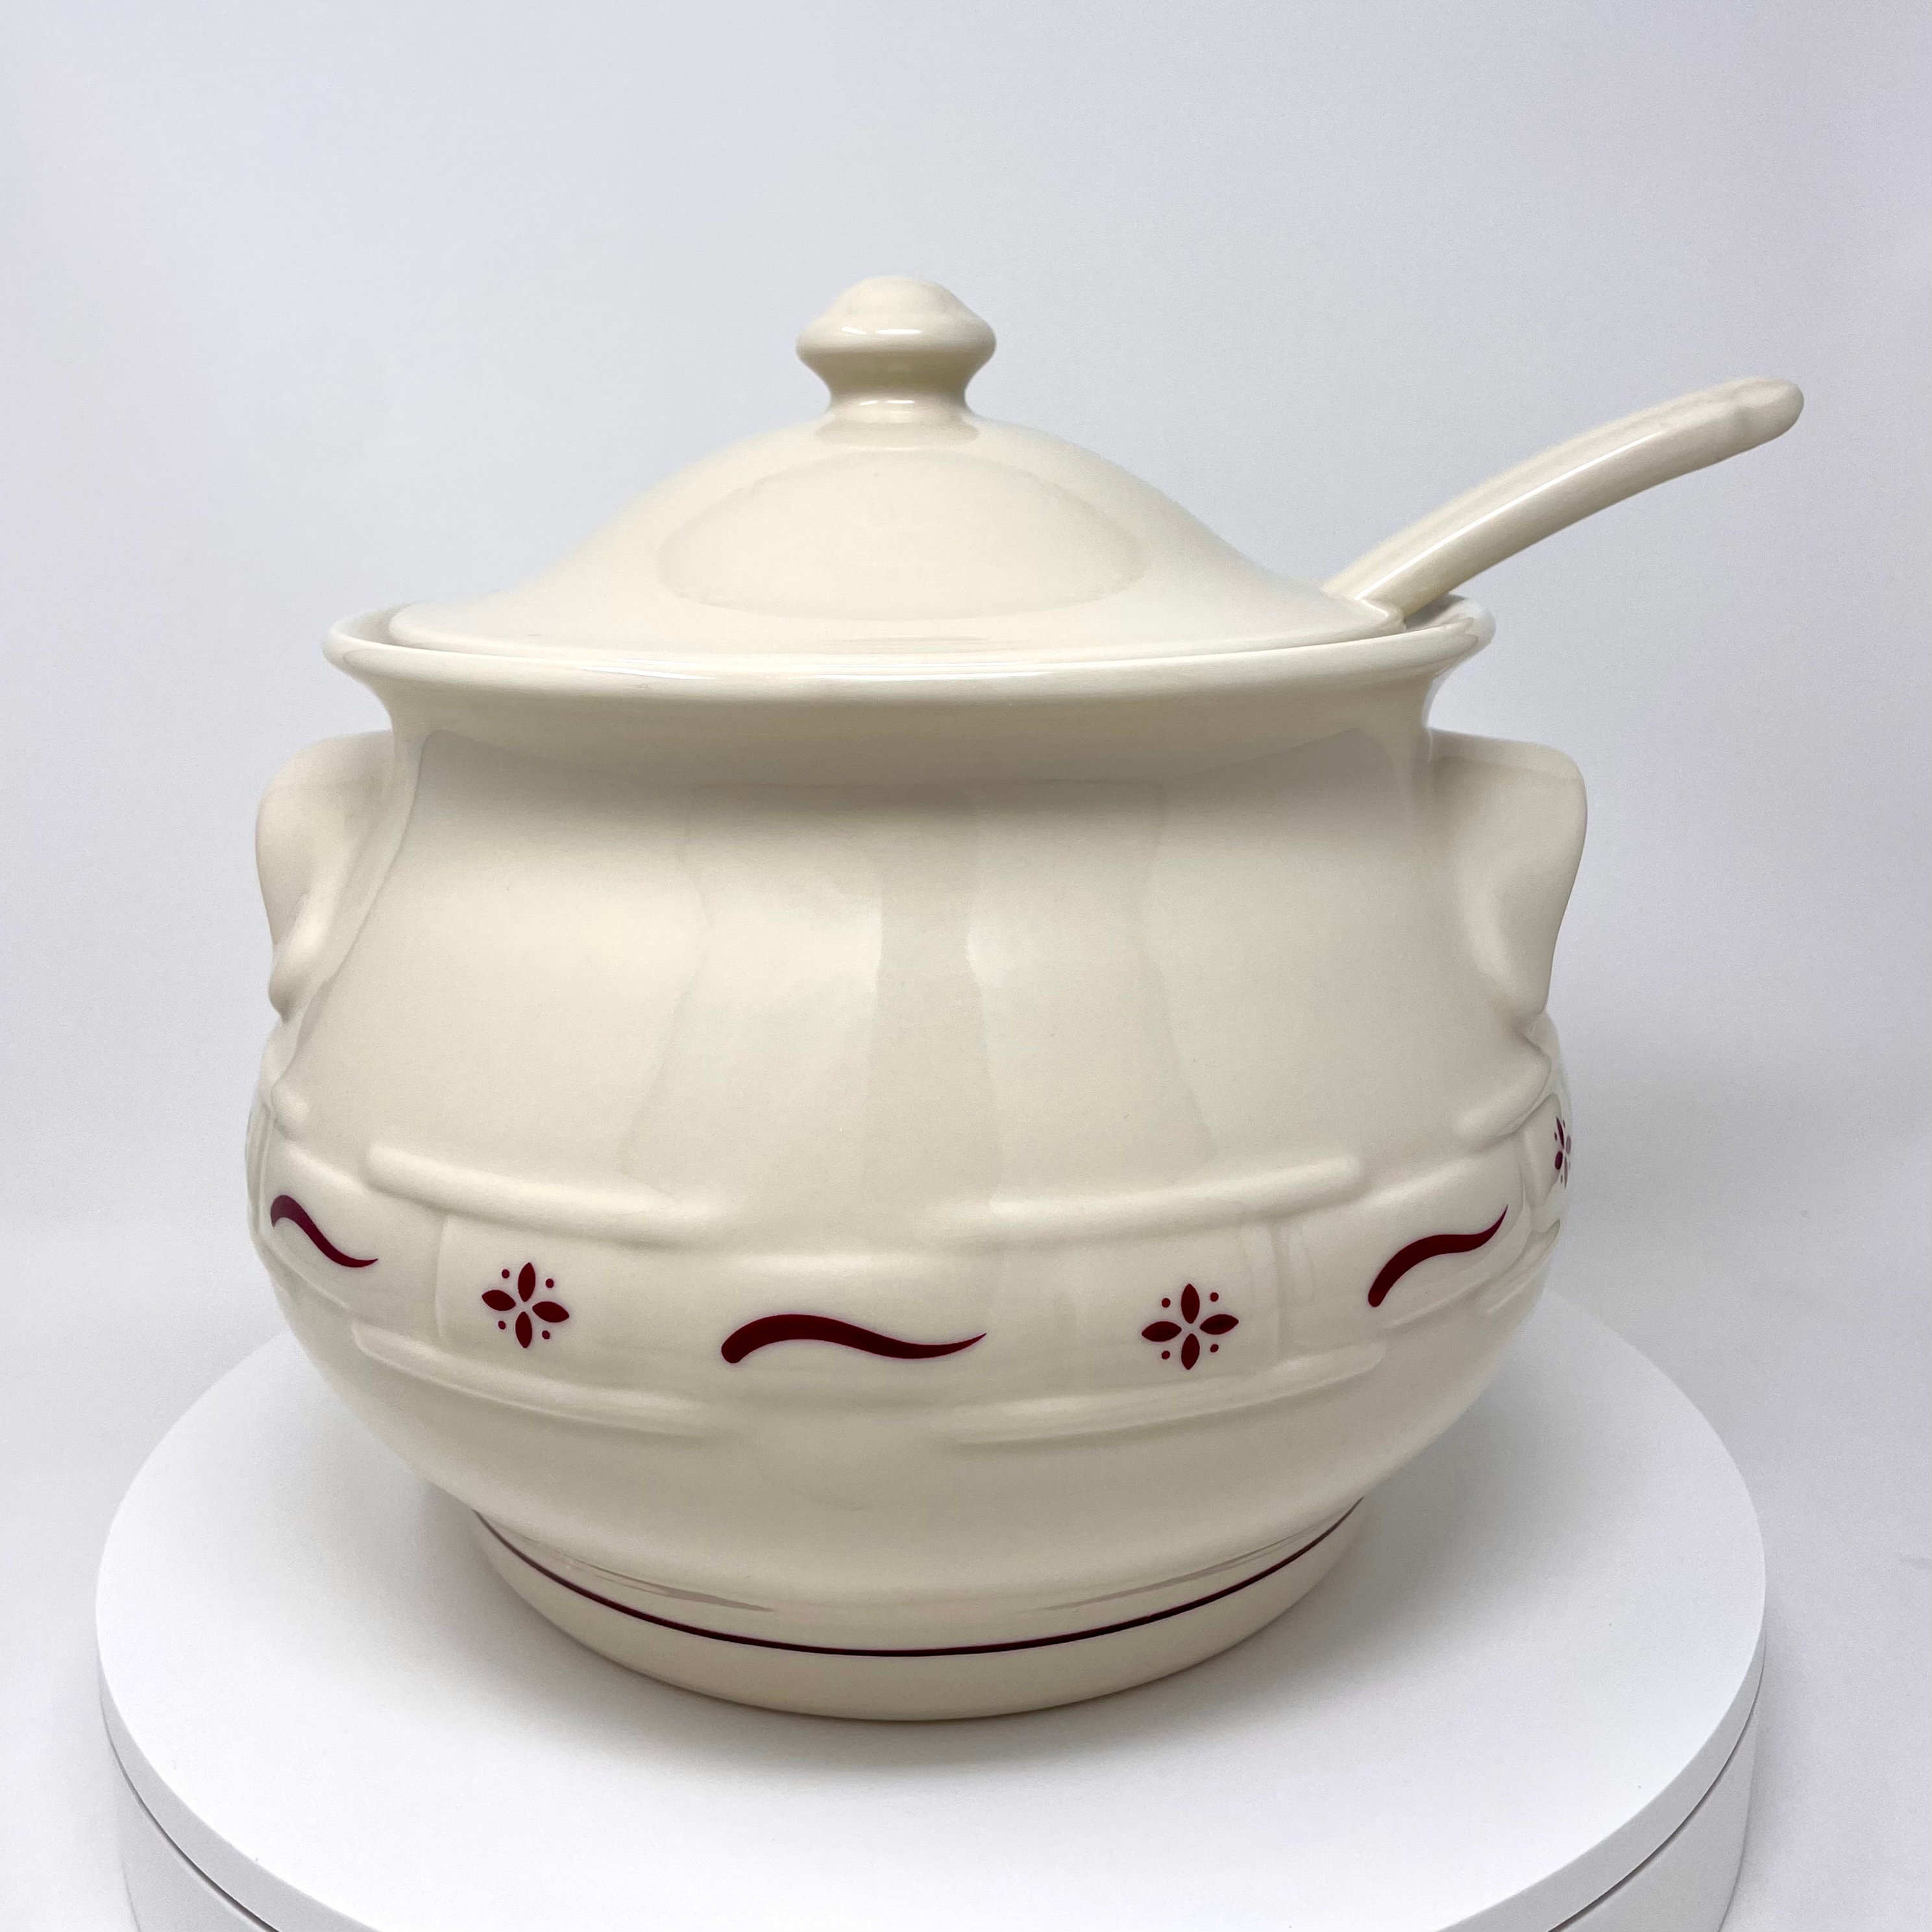 Longaberger Pottery Woven Traditions Red Soup Tureen W/ Ladle 